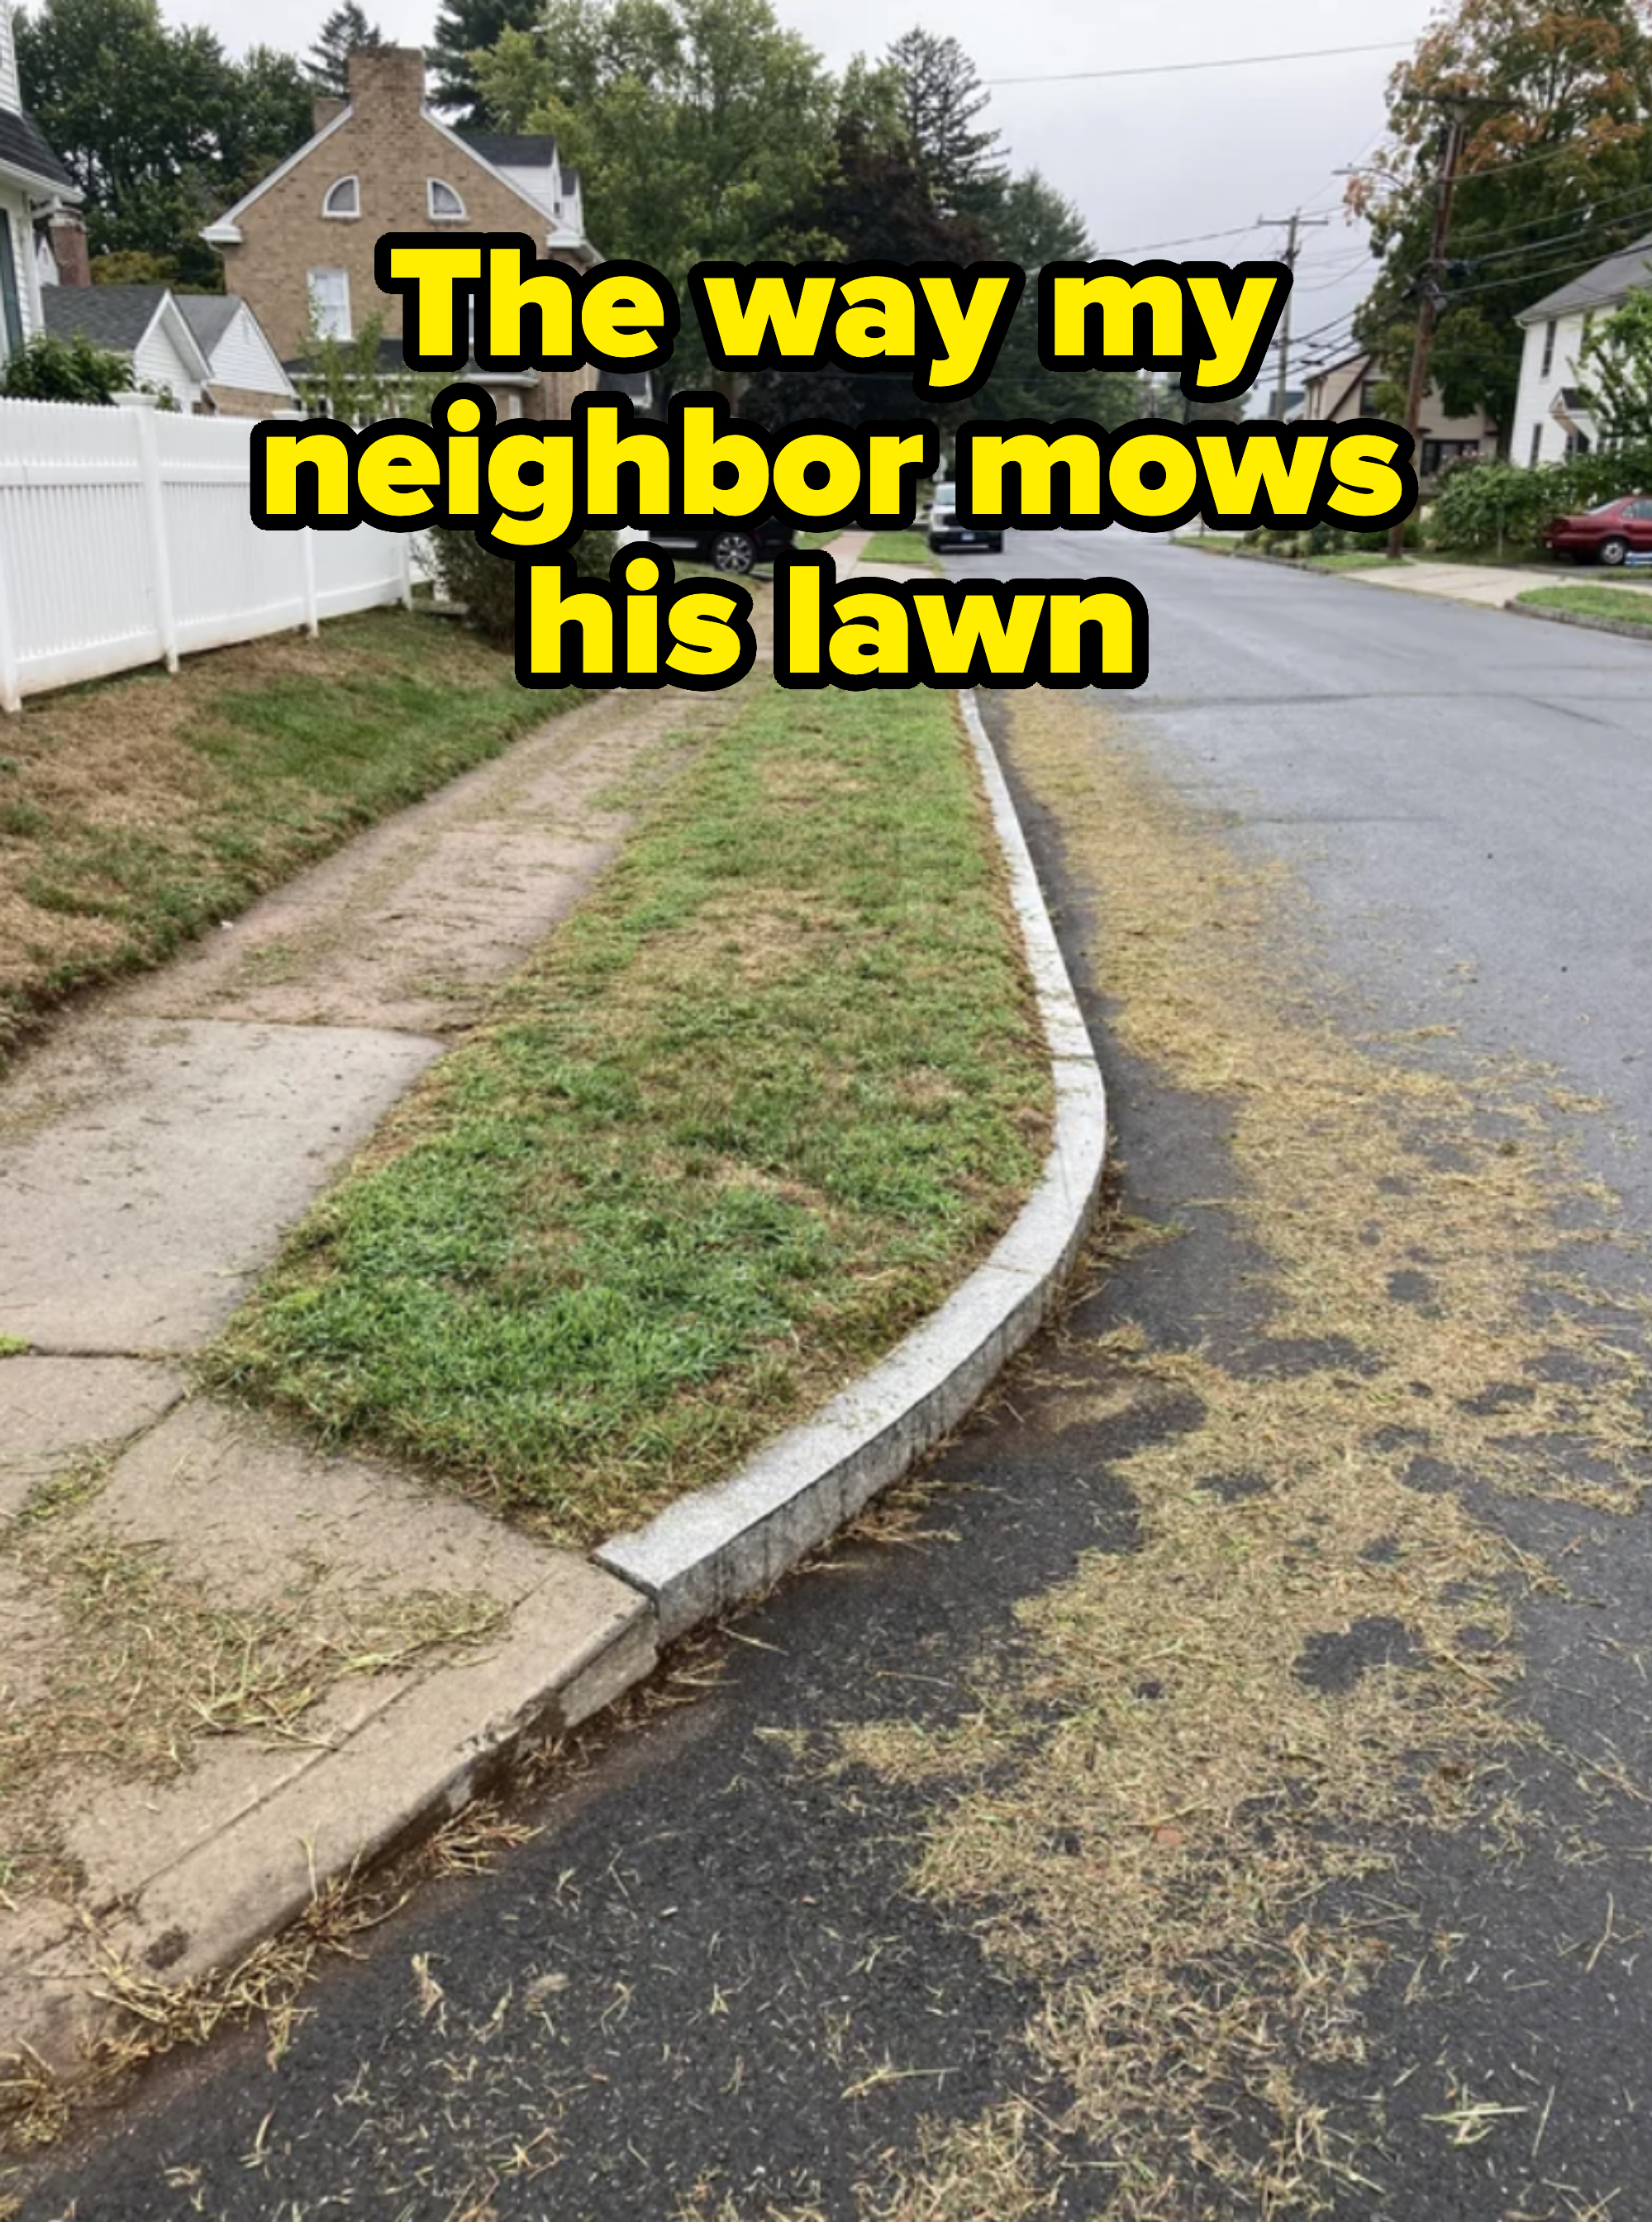 &quot;The way my neighbor mows his lawn&quot; with grass all over the street